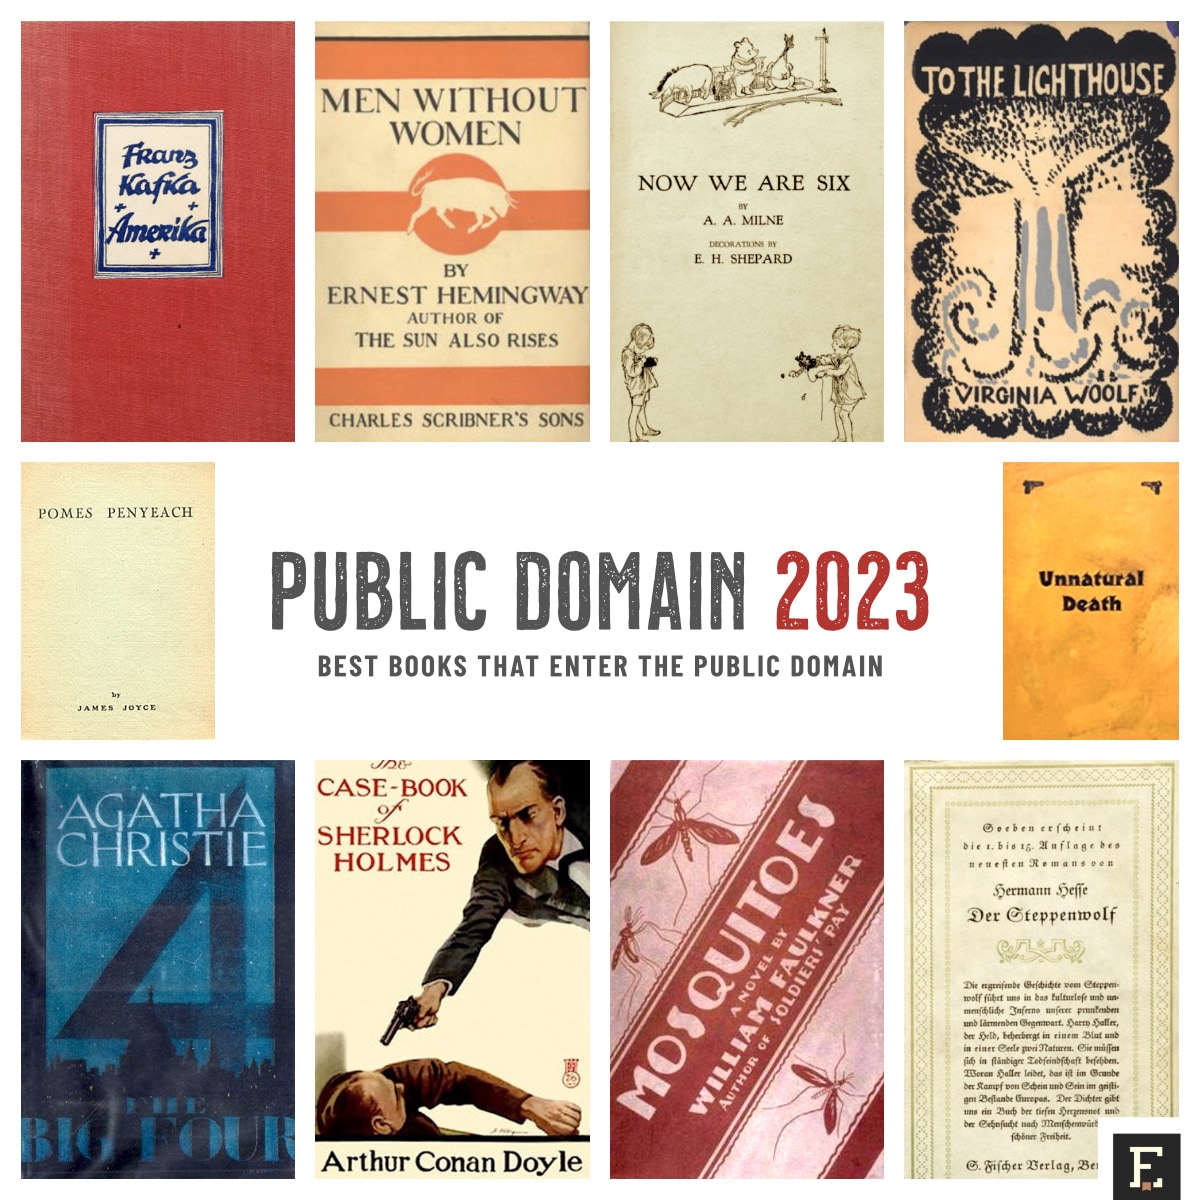 10 most interesting books that enter the public domain in 2023